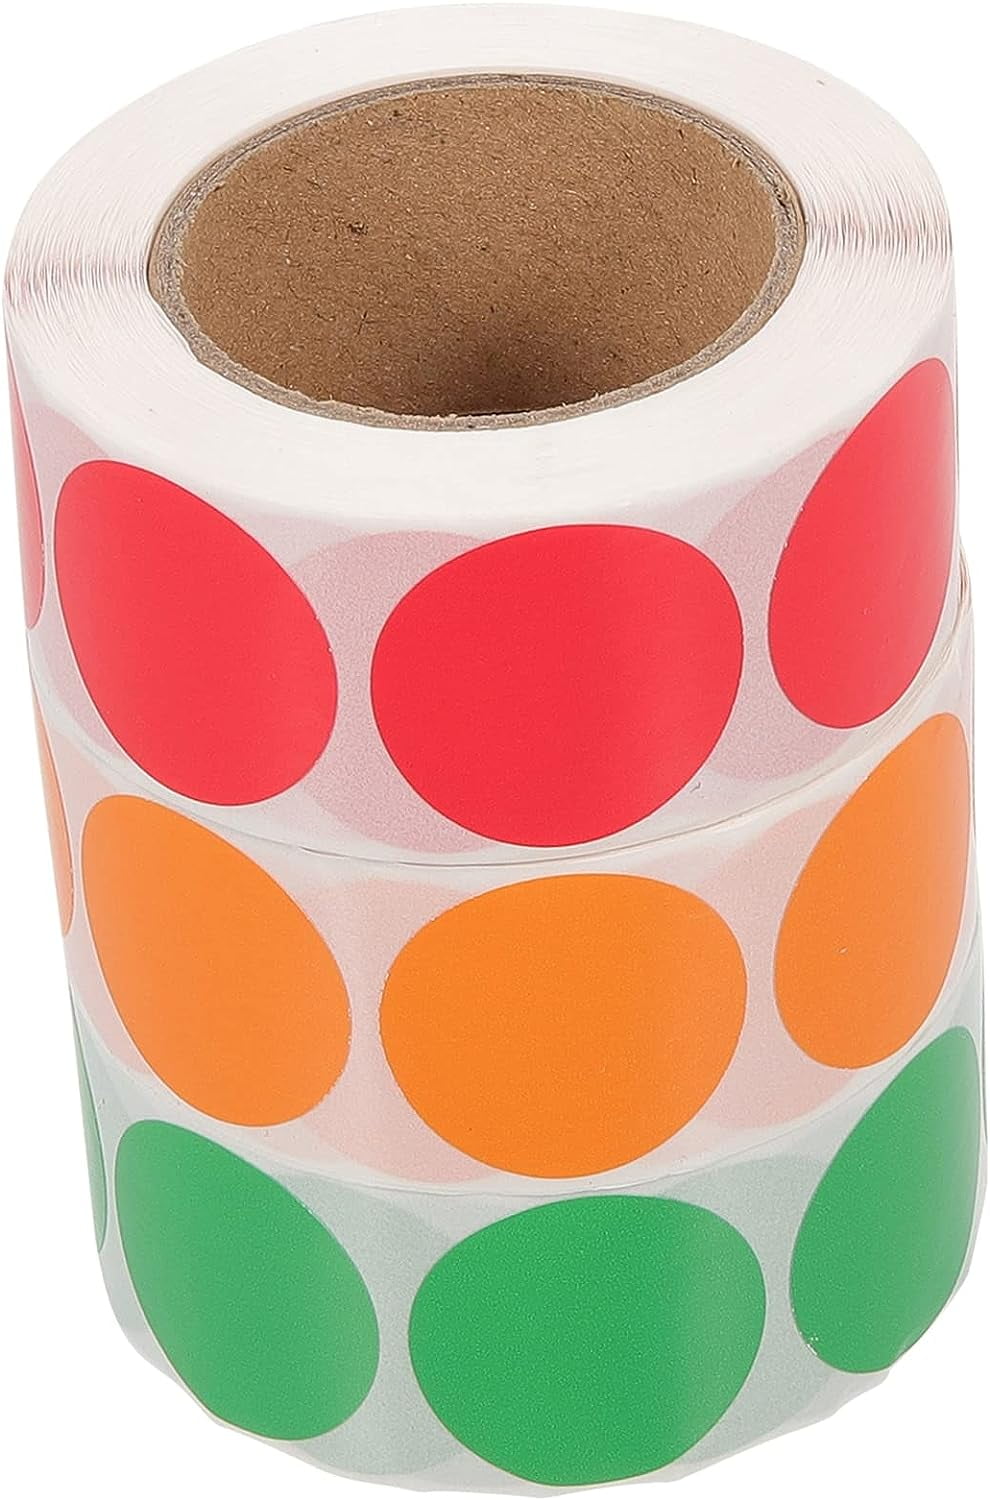 Traffic Light Stickers 3 Rolls Colored Tabs Sticker Labels Round Stickers Heat Self Adhesive 6686